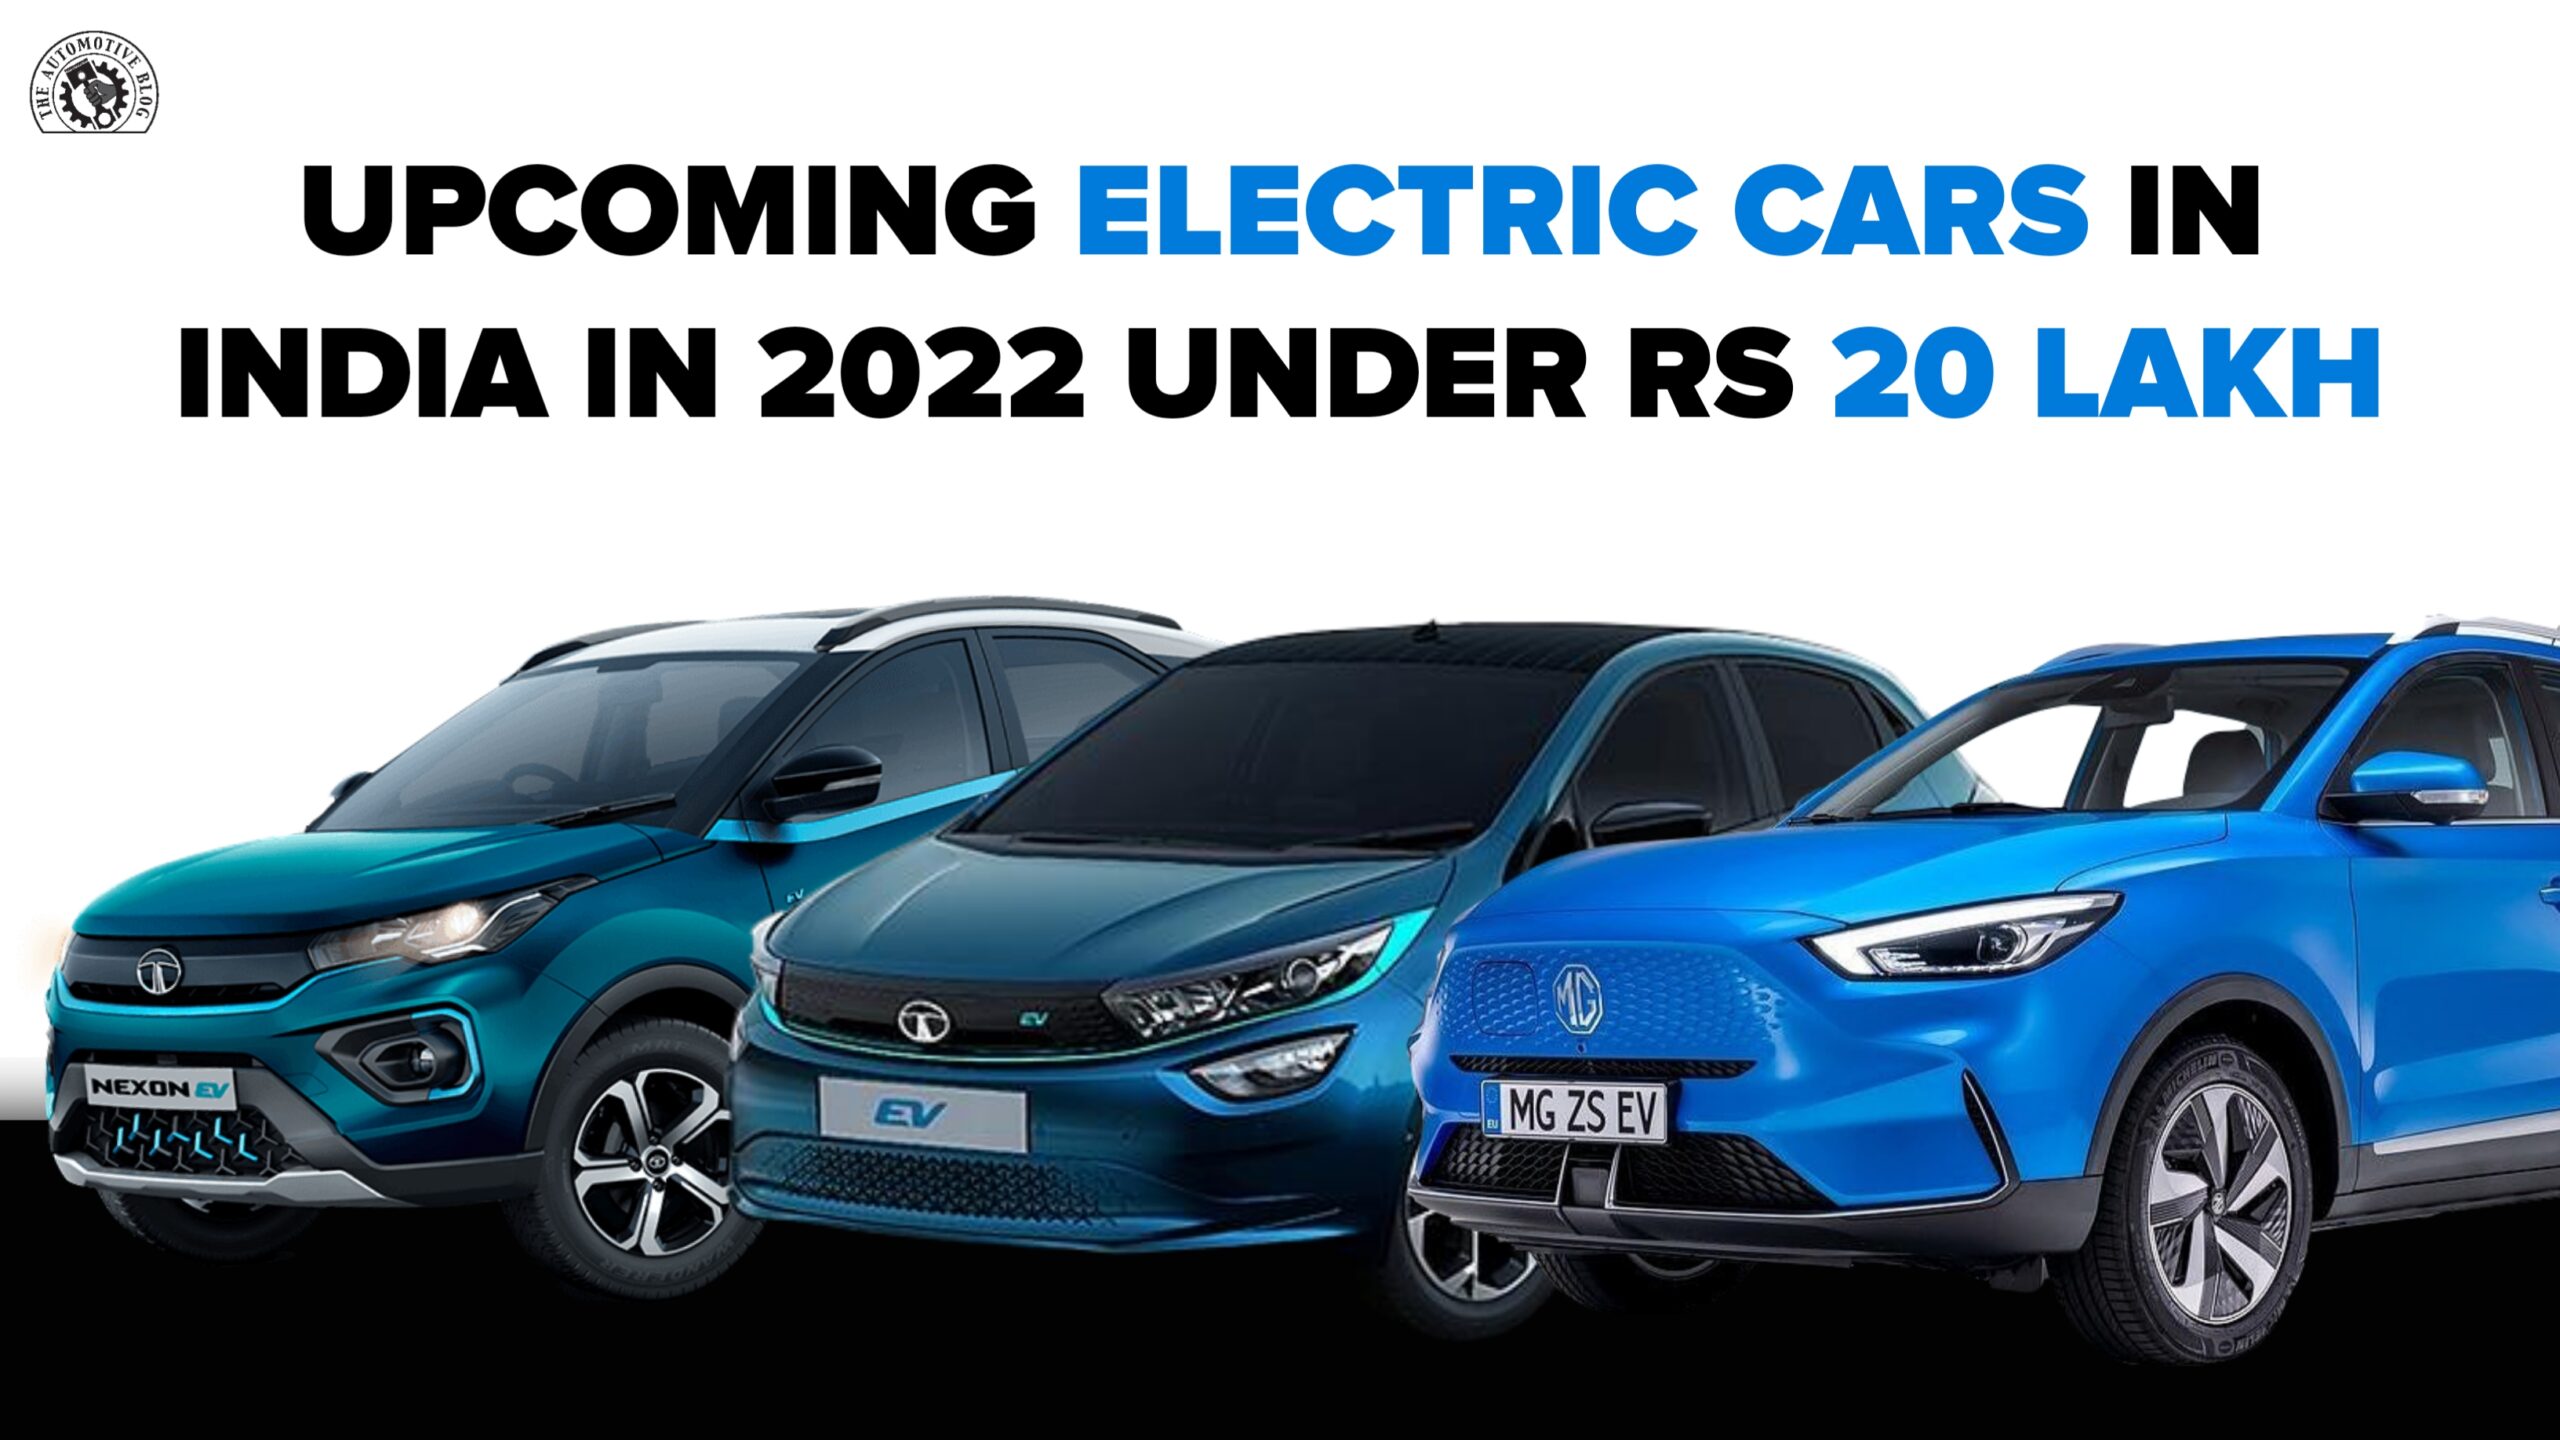 Upcoming Electric Cars in India in 2022 under Rs 20 lakh